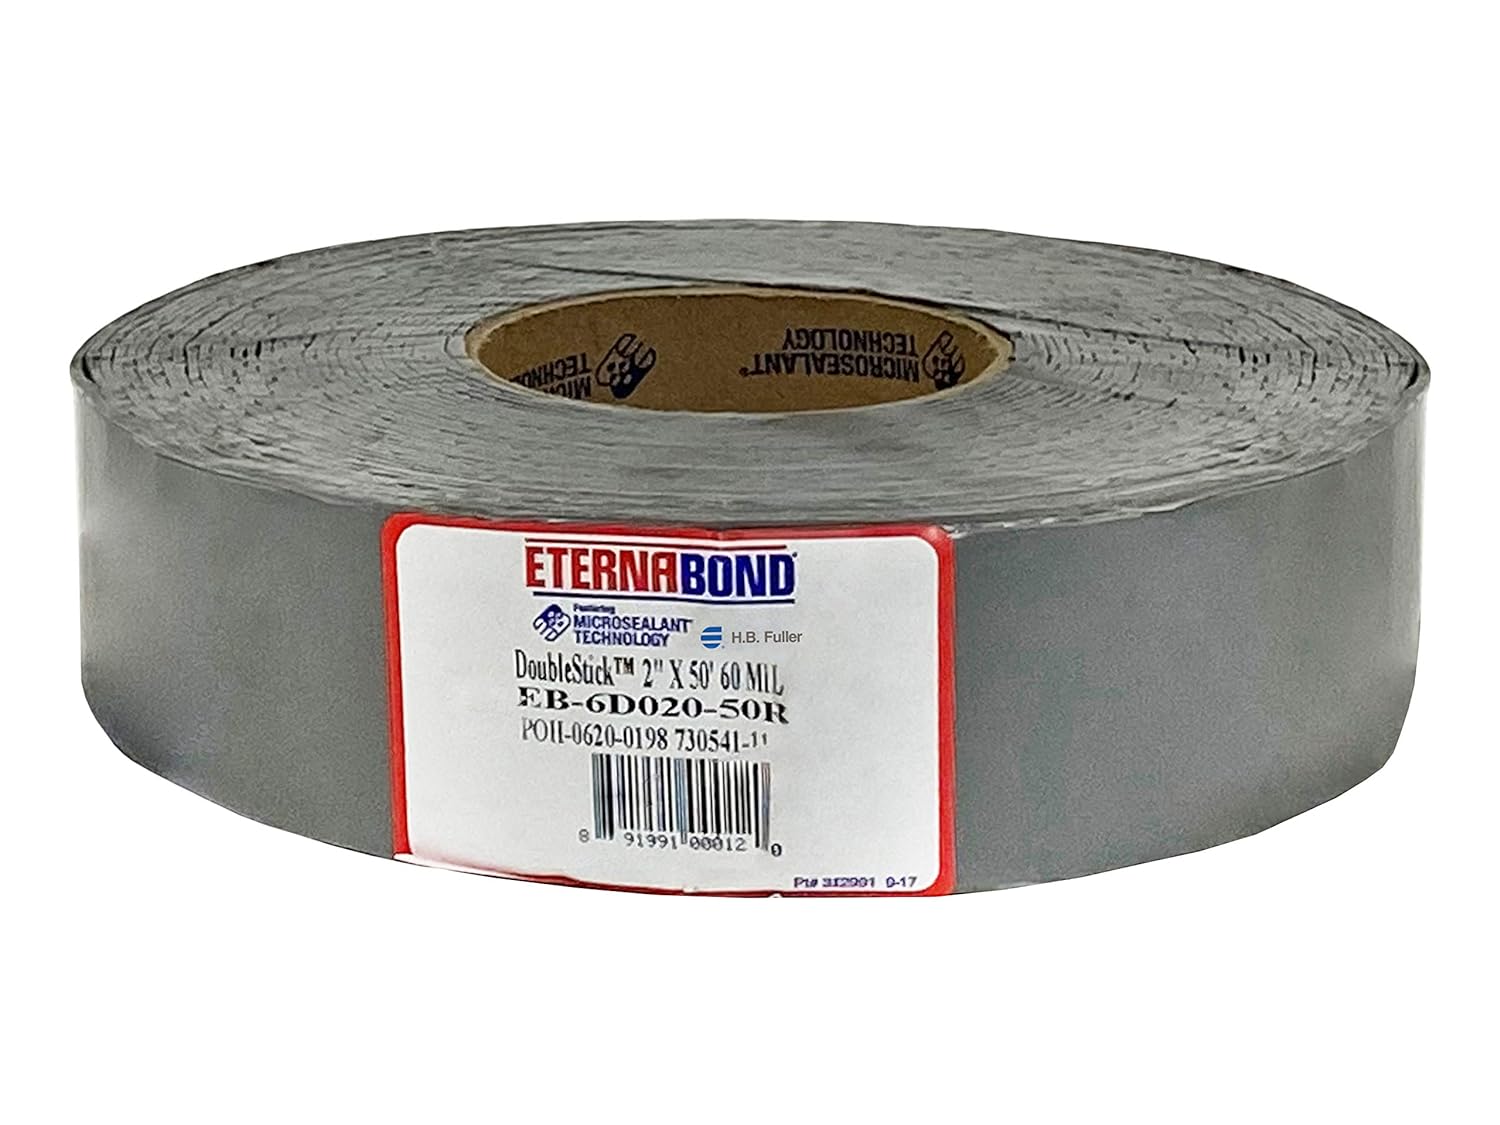 EternaBond DoubleStick 2" x50' Double-Sided Bonding Tape | 60 mil Adhesive Thickness | EB-6D020-50R | Permanent, Weather Proof, Self Sealing Bond Sticks to Many Surfaces